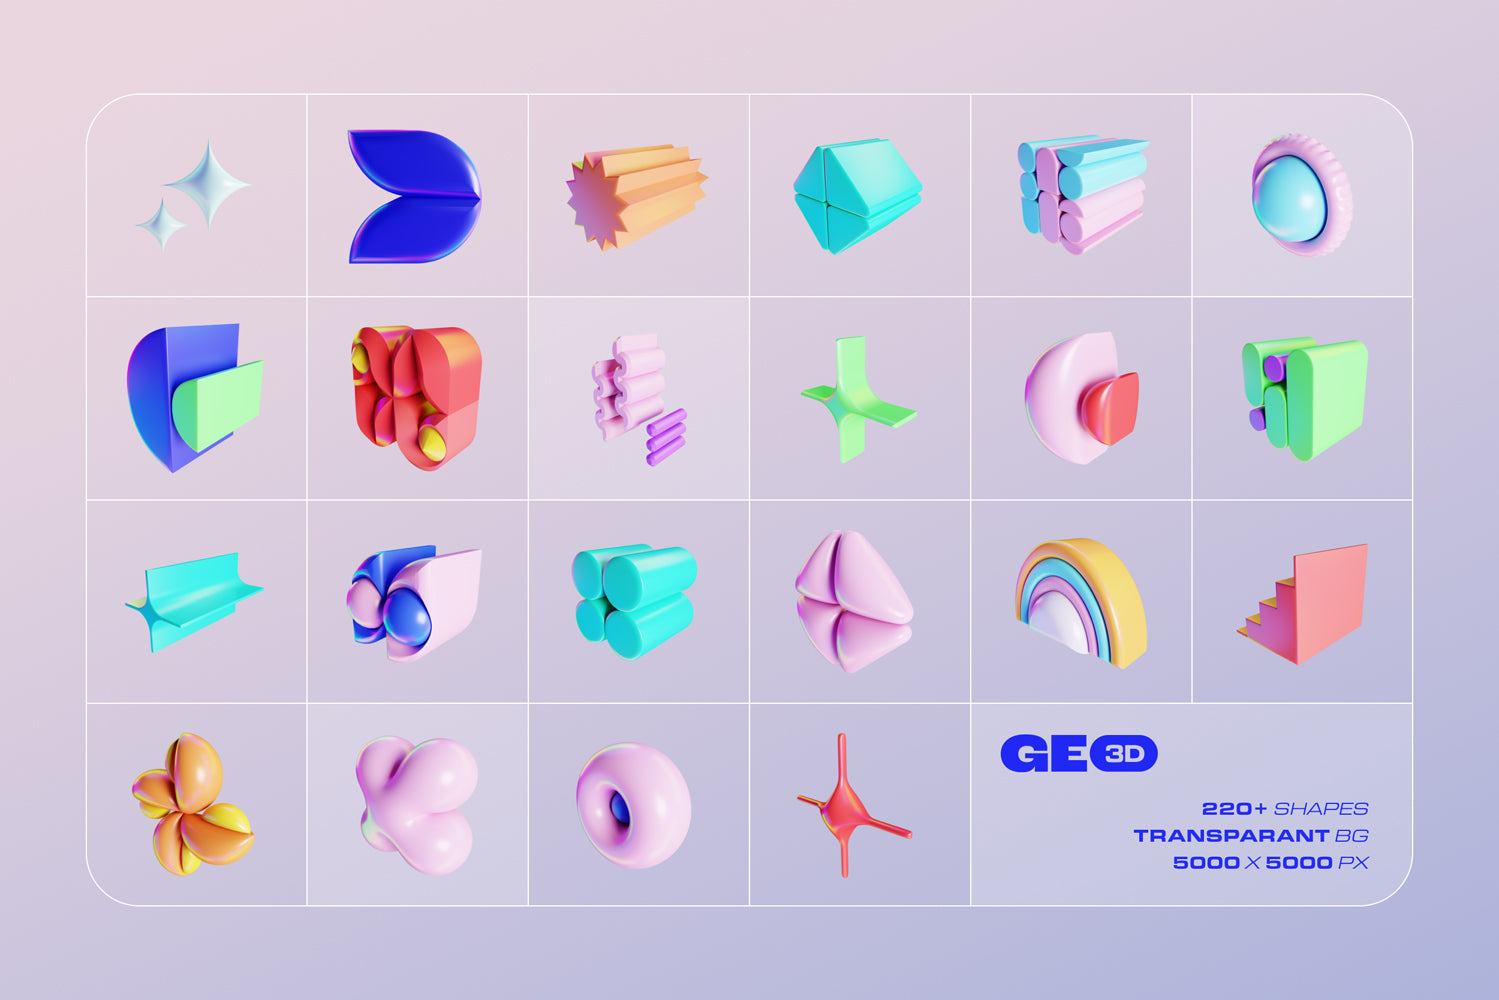 GEO/3D 220+ Colorful Objects